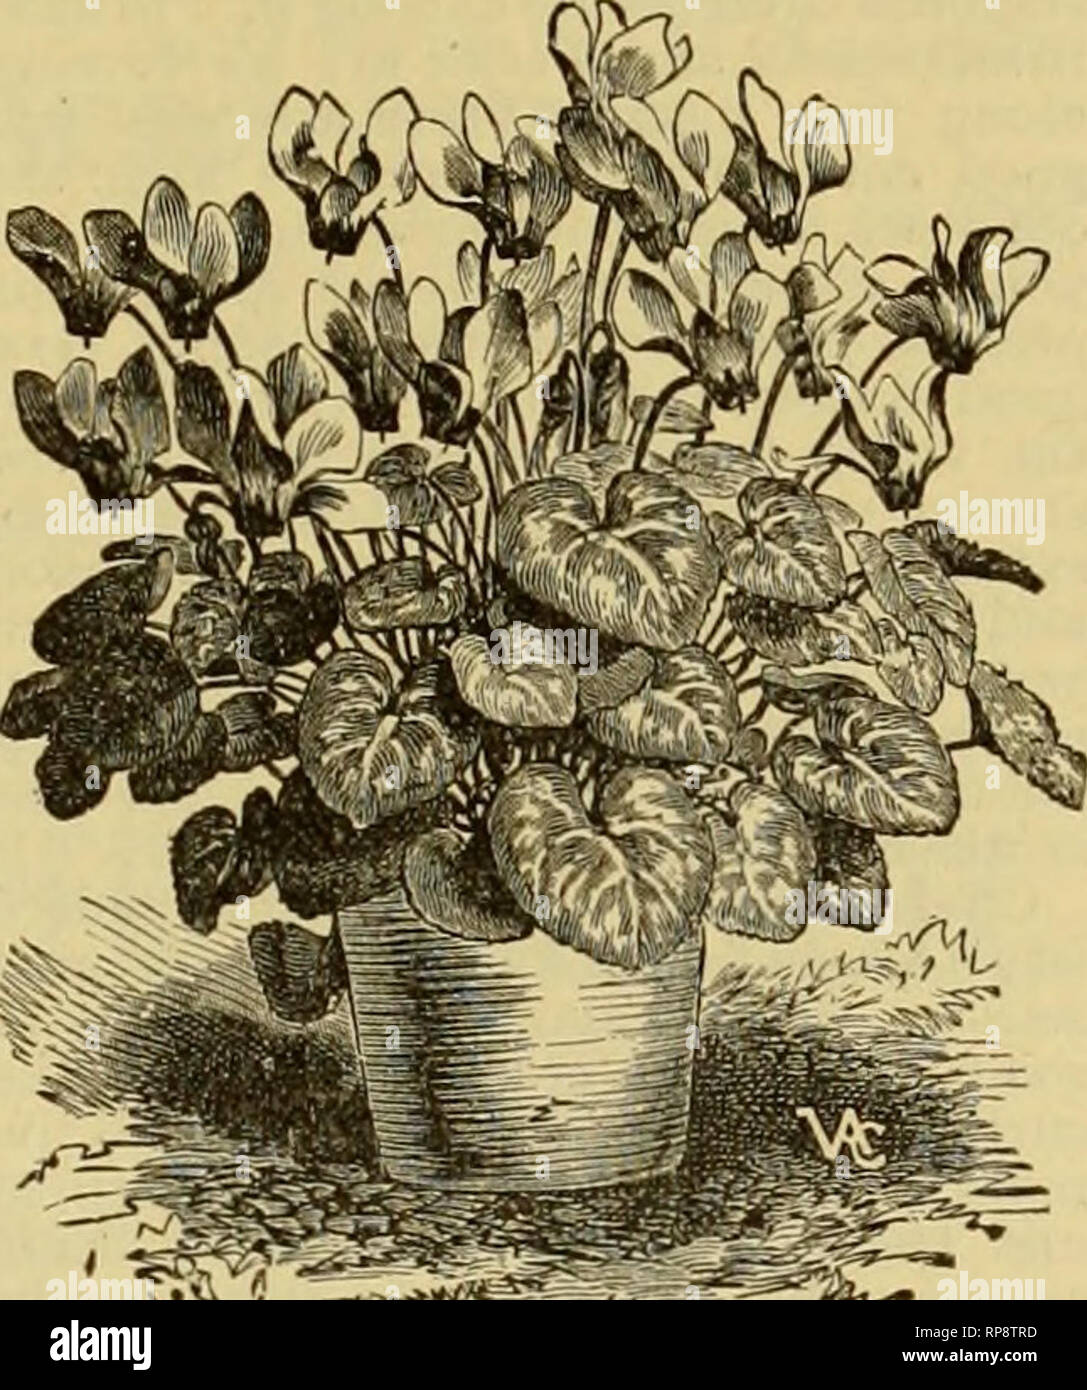 . The American florist : a weekly journal for the trade. Floriculture; Florists. THEMOON For (Trees, Shrubs, Vines Yourl and Small Fruits. Descriptive Illustrated Catalogue Free THE WM. H.'MOON CO. Miorrisville, Pa. The Royal Tottenham Nurseries, Ltd. DLDEMSVAART, near ZWOILE, NETHtRUNDS. Headquarters for Hardy Perennials, PaeonieB. Iris Germanica and Kaempferi. Anemones, Phlox Decussata, choice Alpine plants. Hardy Ericas. Tritoma, Hardy Ferns. Delphiniums. Novelties in this line a specialty. Conifers (special young stock). Hydrangeas, Rhododendrons and Azaleas. We grow also some 8 acres of D Stock Photo